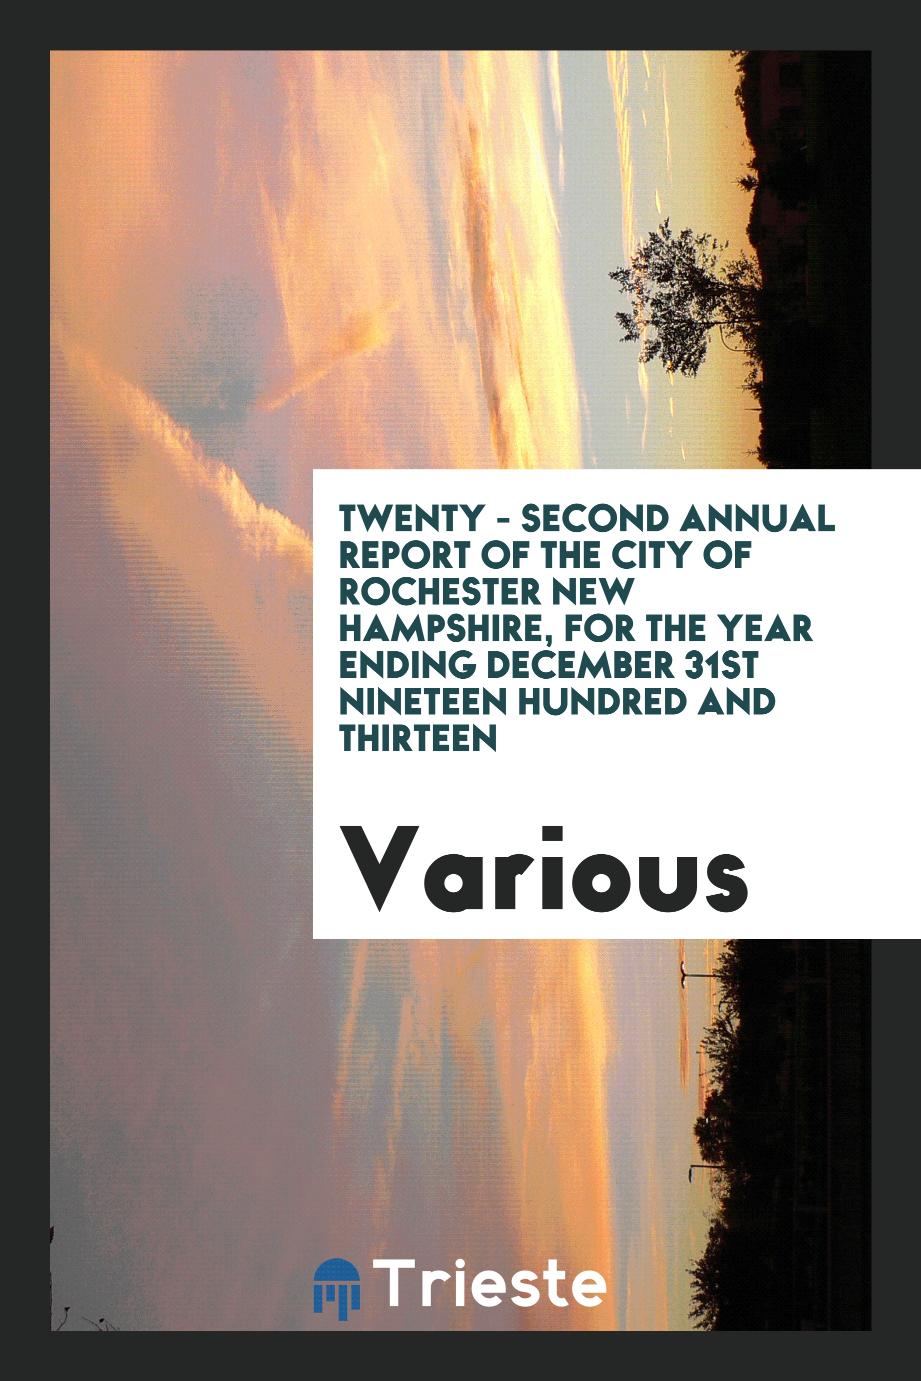 Twenty - Second Annual report of the city of Rochester New Hampshire, for the year Ending December 31st Nineteen Hundred and Thirteen